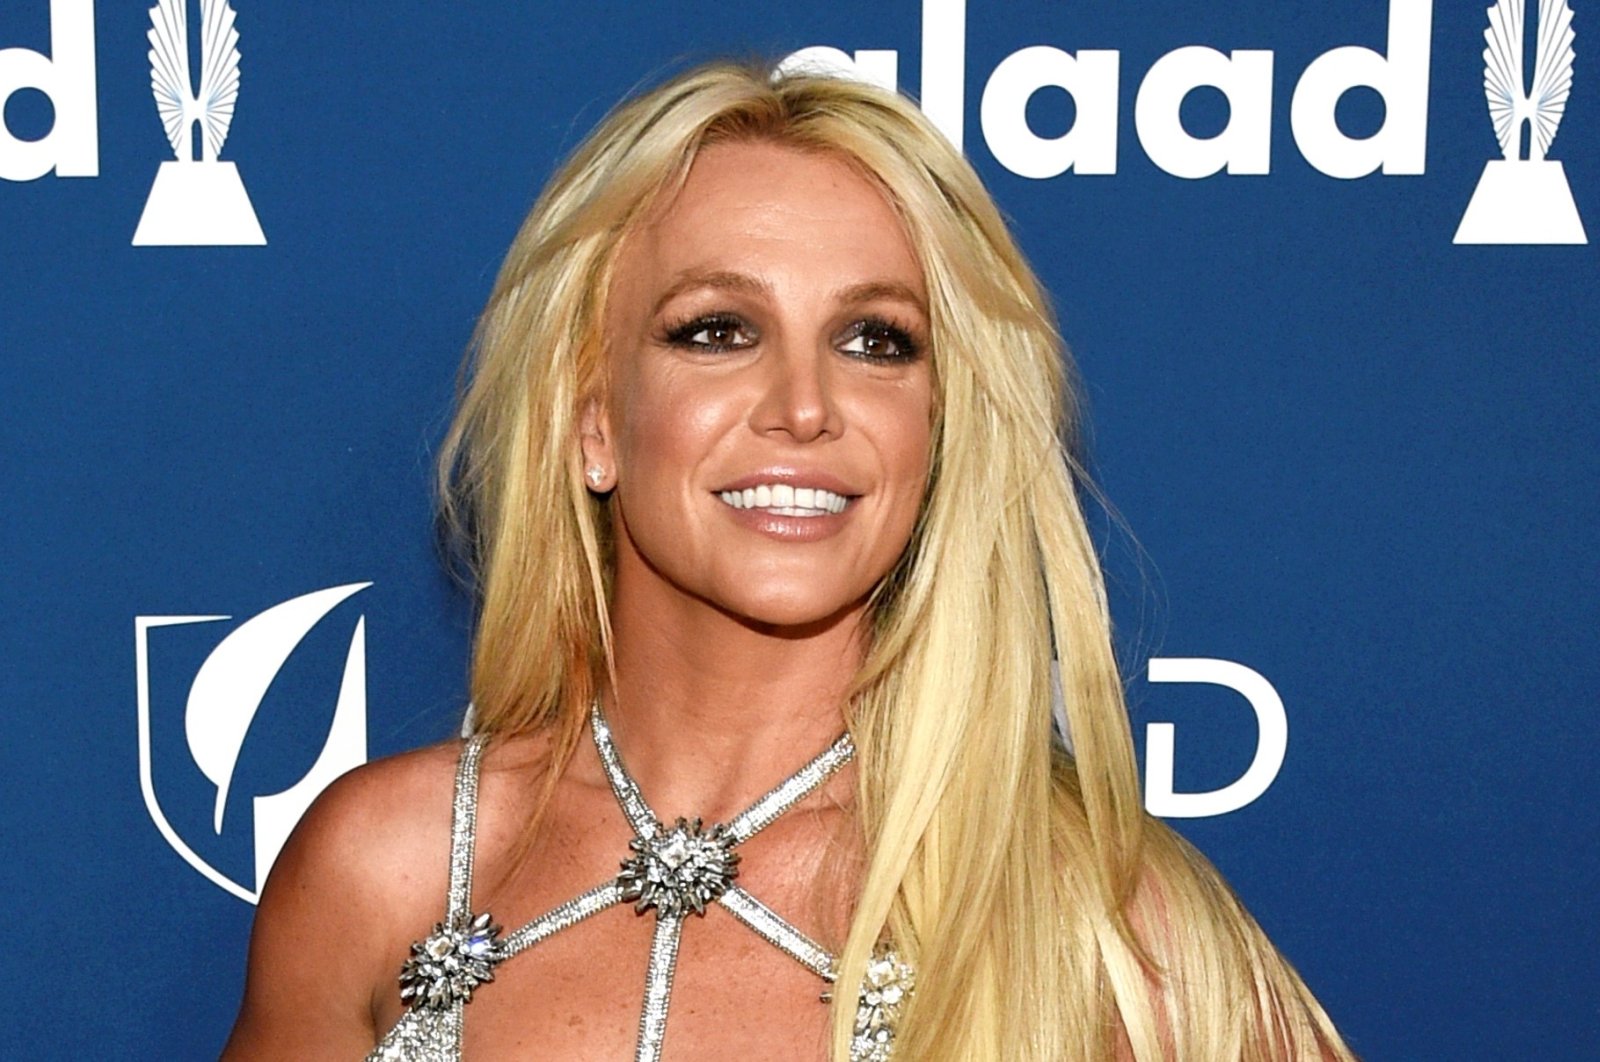 Britney Spears appears at the 29th annual GLAAD Media Awards in Beverly Hills, Calif., U.S., April 12, 2018. (AP)